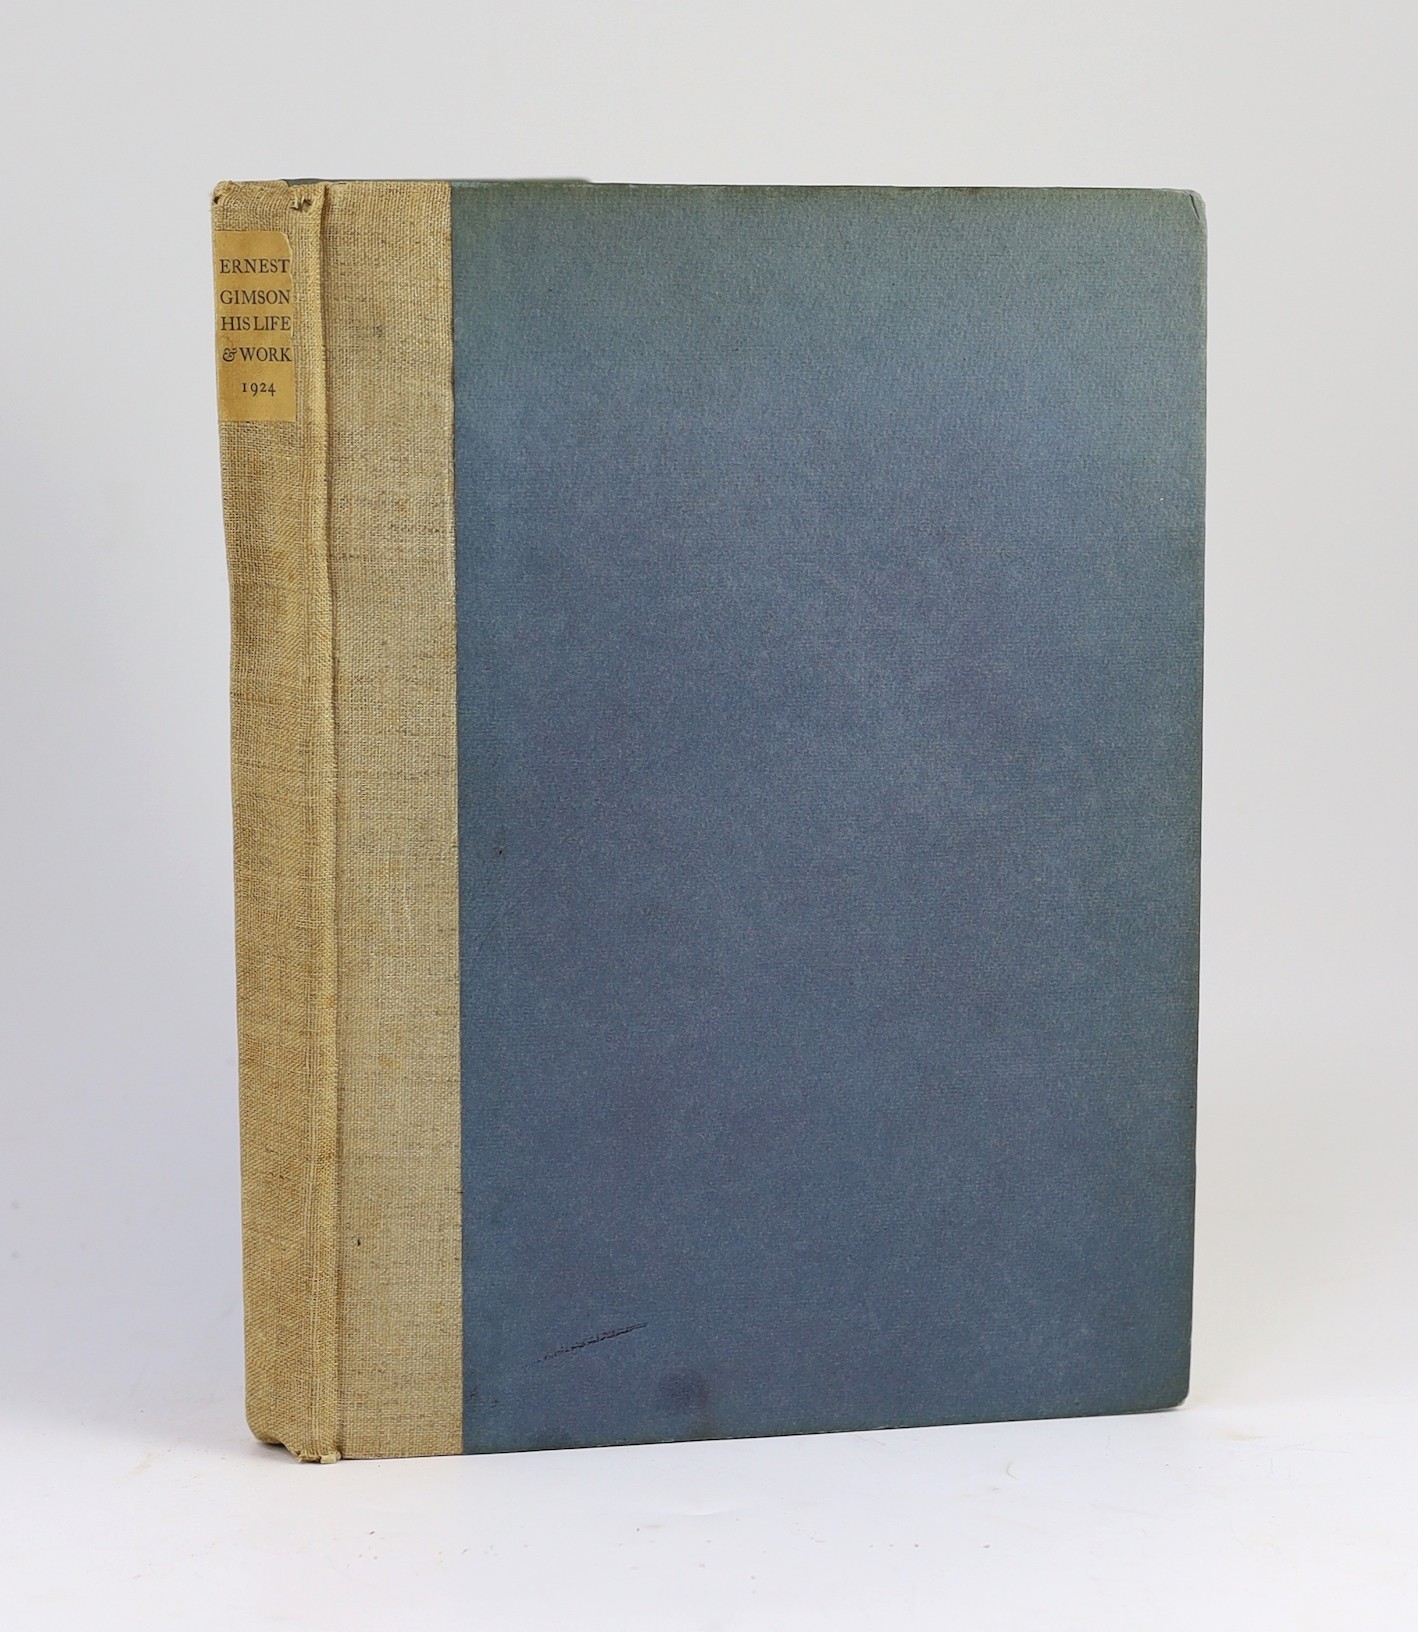 Lethaby, W. R, Powell, A.H and Griggs, F.L - Ernest Gimson: His Life and Work, one of 500, 4to, blue boards with linen spine, with engraved title, 60 plates by Emery Walker & errata slip, deckle edged leaves, Shakespeare